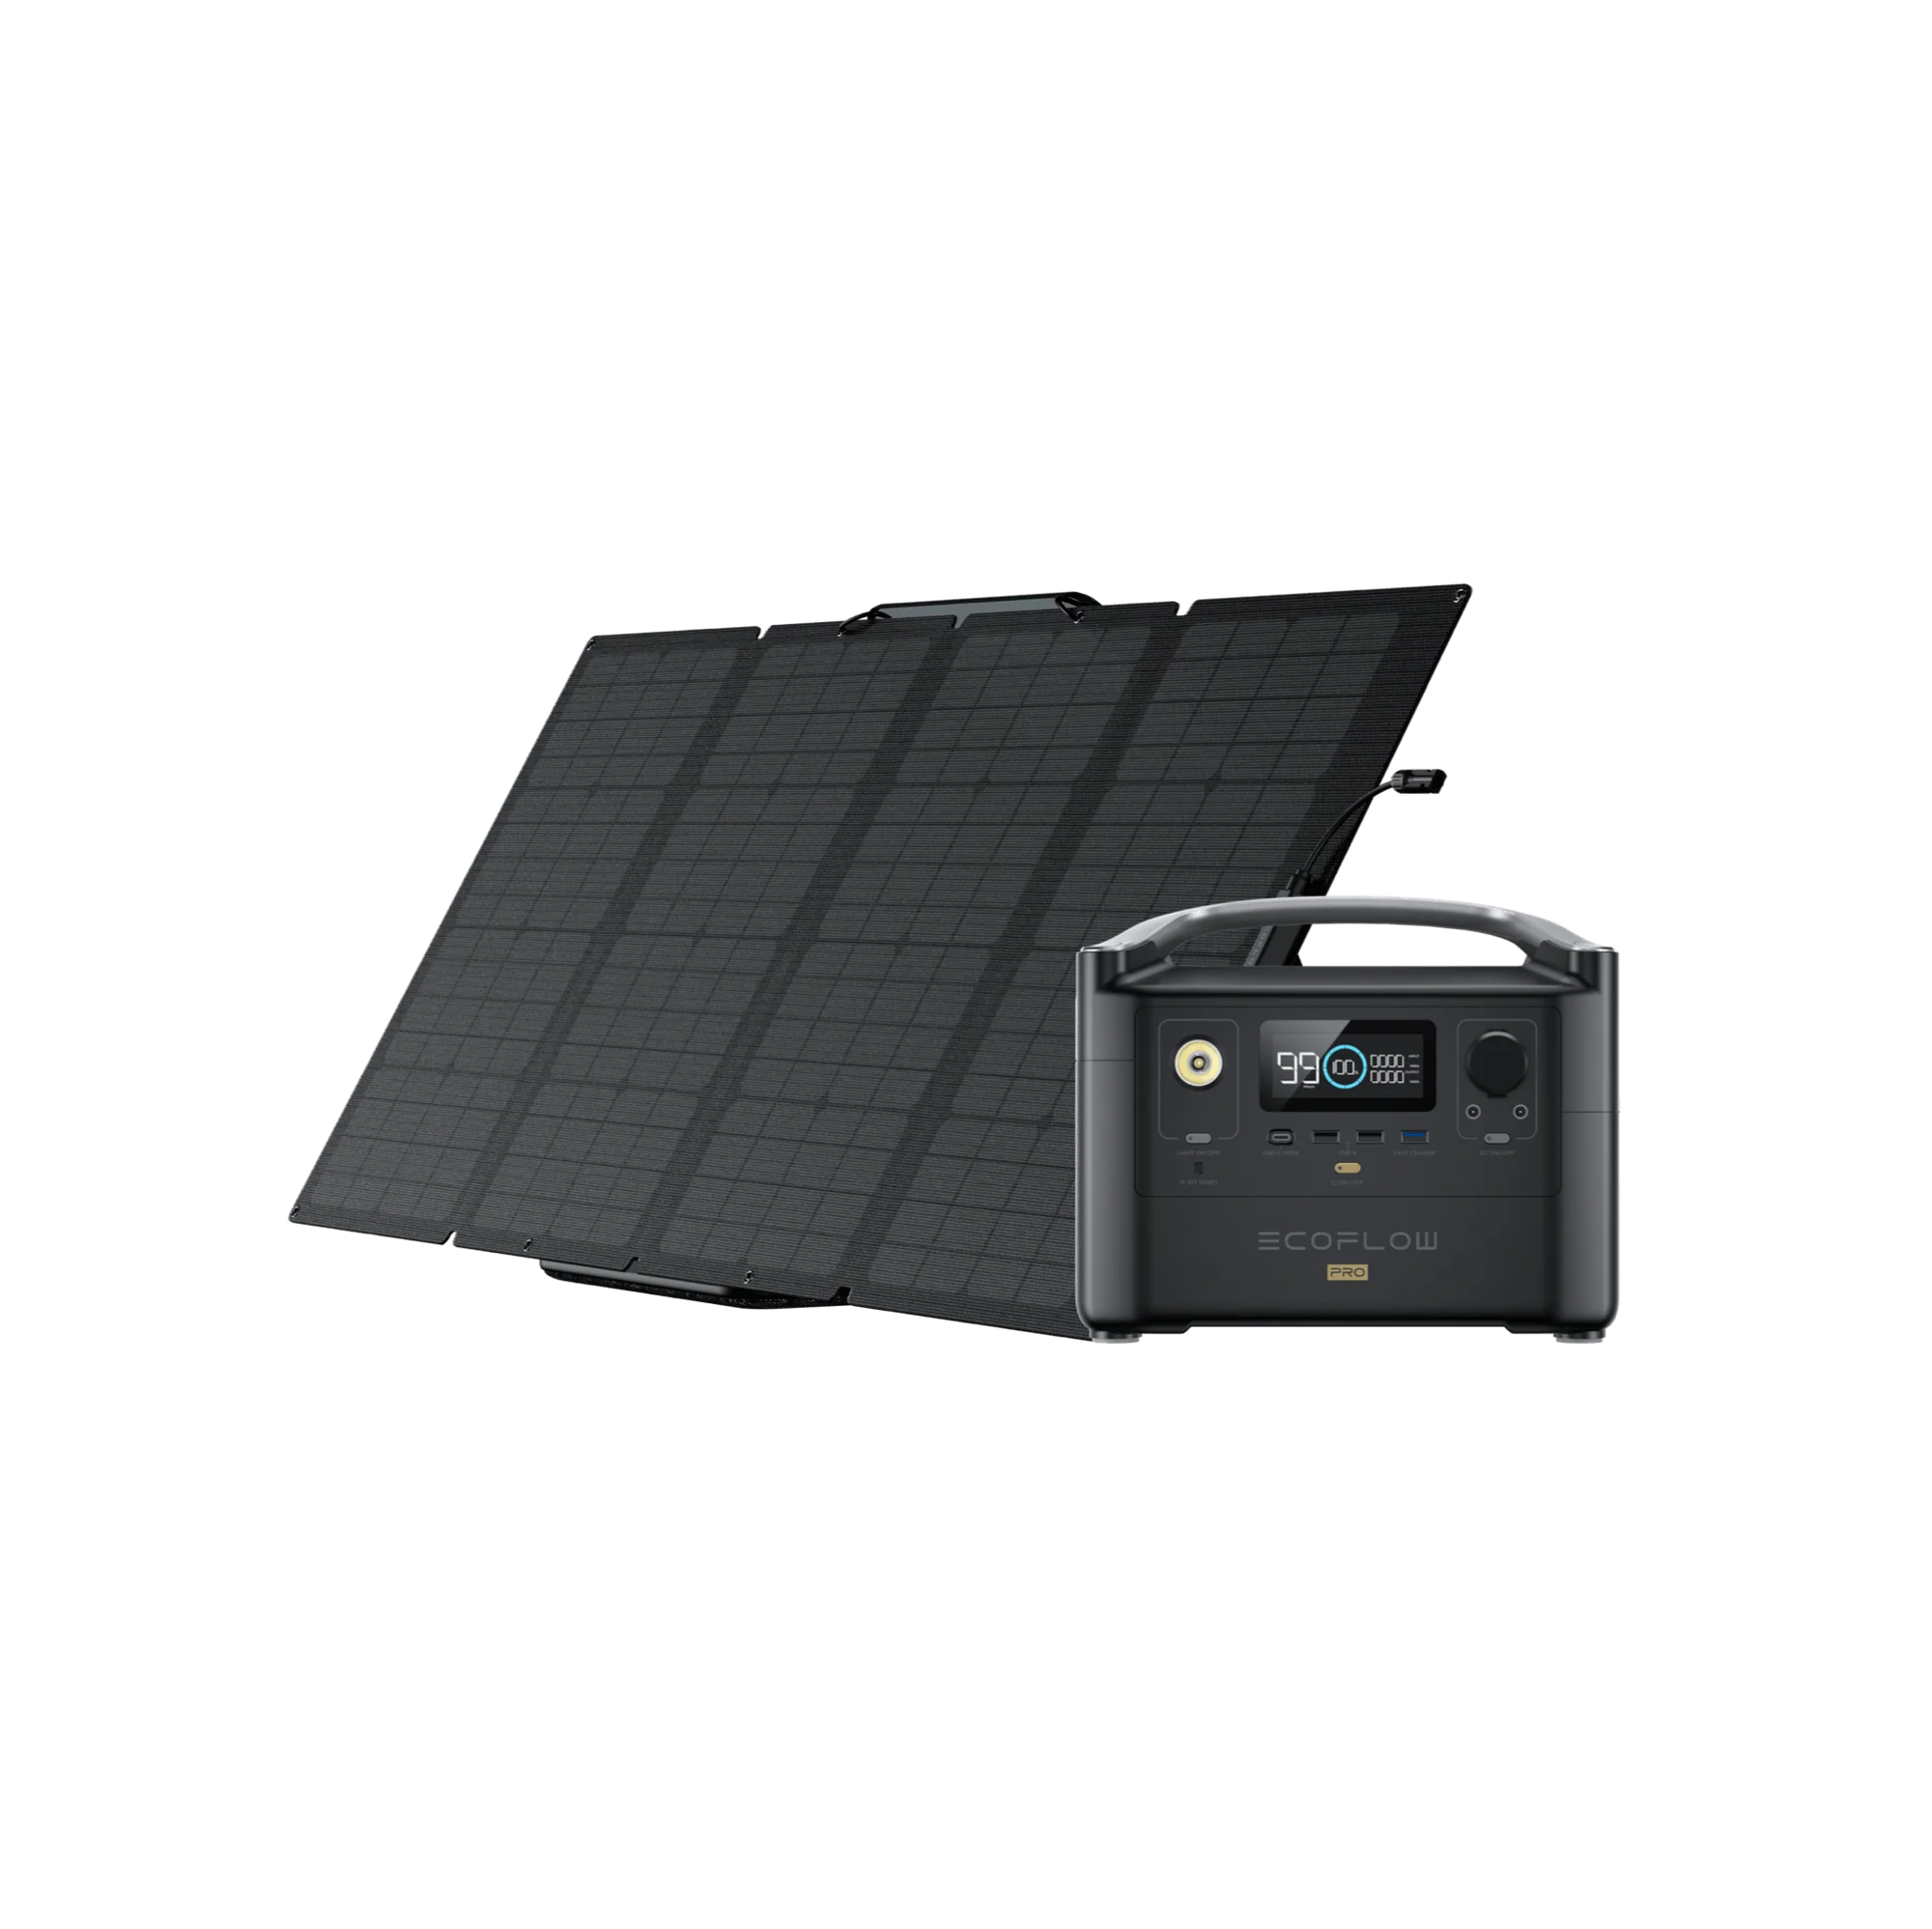 EF ECOFLOW Portable Power Station RIVER 2 Max, 512Wh LiFePO4 Battery/ 1  Hour Fast Charging, Up To 1000W Output Solar Generator (Solar Panel  Optional)